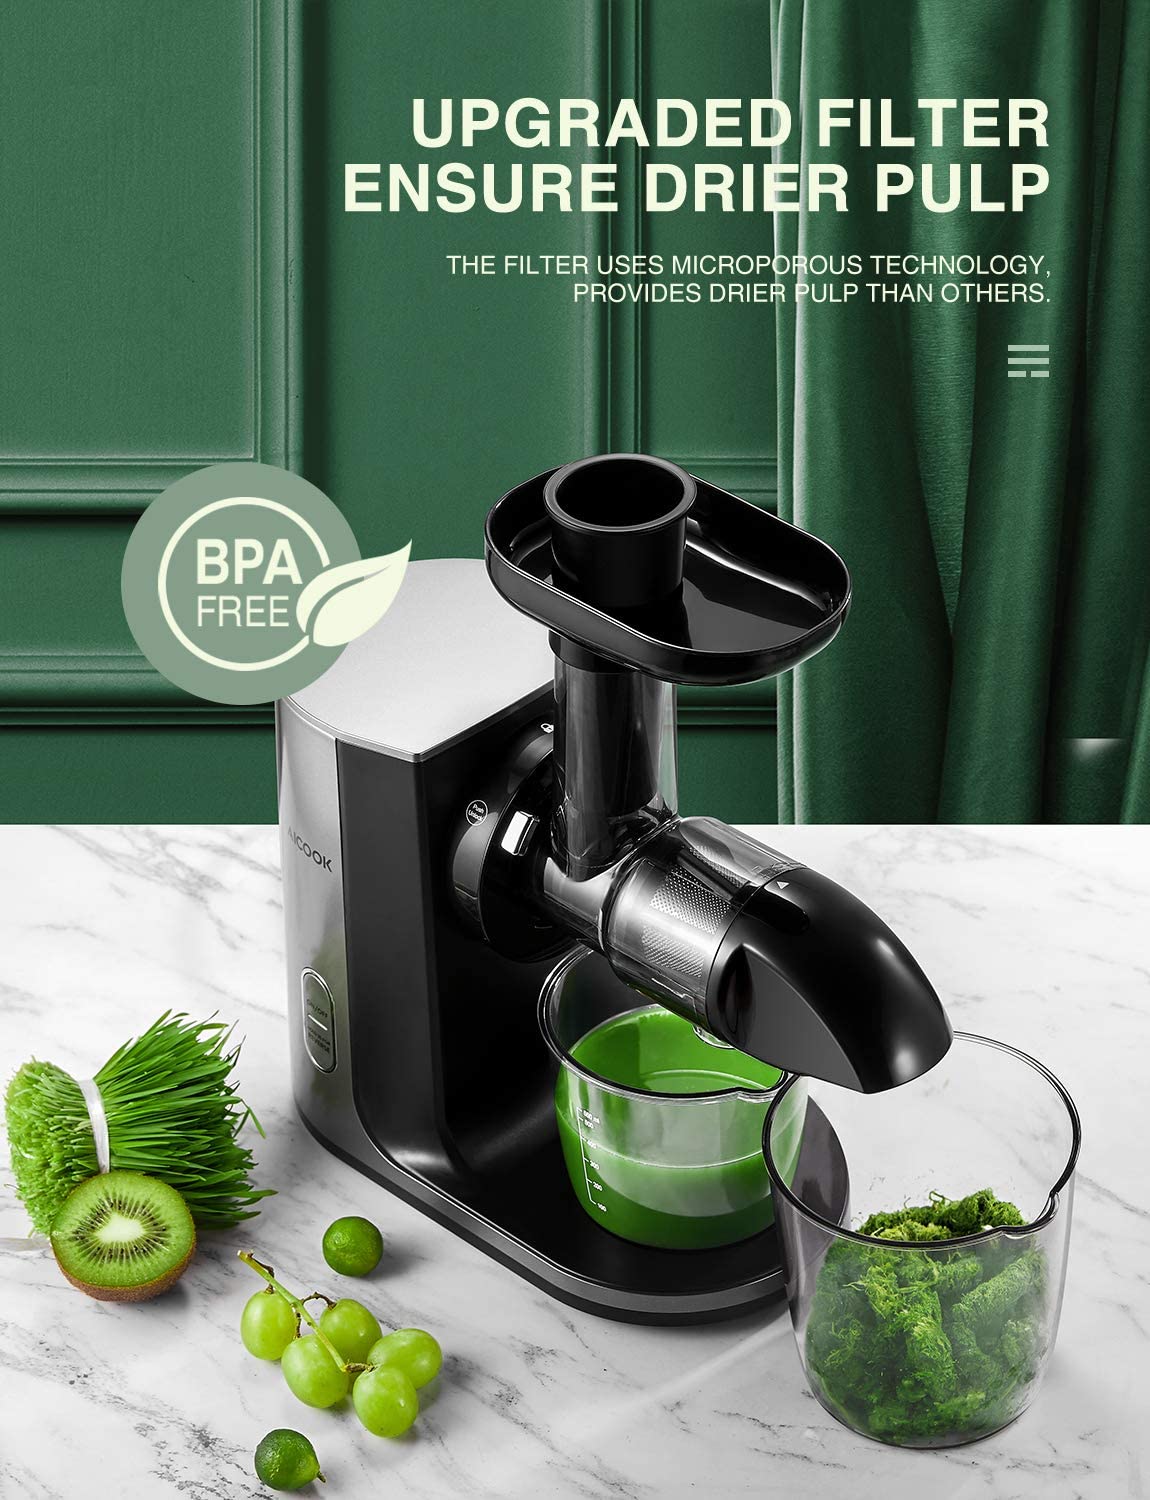 Juicer Machines, Aicook Cold Press Masticating Juicer with Quiet Motor, Easy to Clean with Brush, Higher Juice Yield, Reverse Function & Recipes for Vegetables and Fruits Included